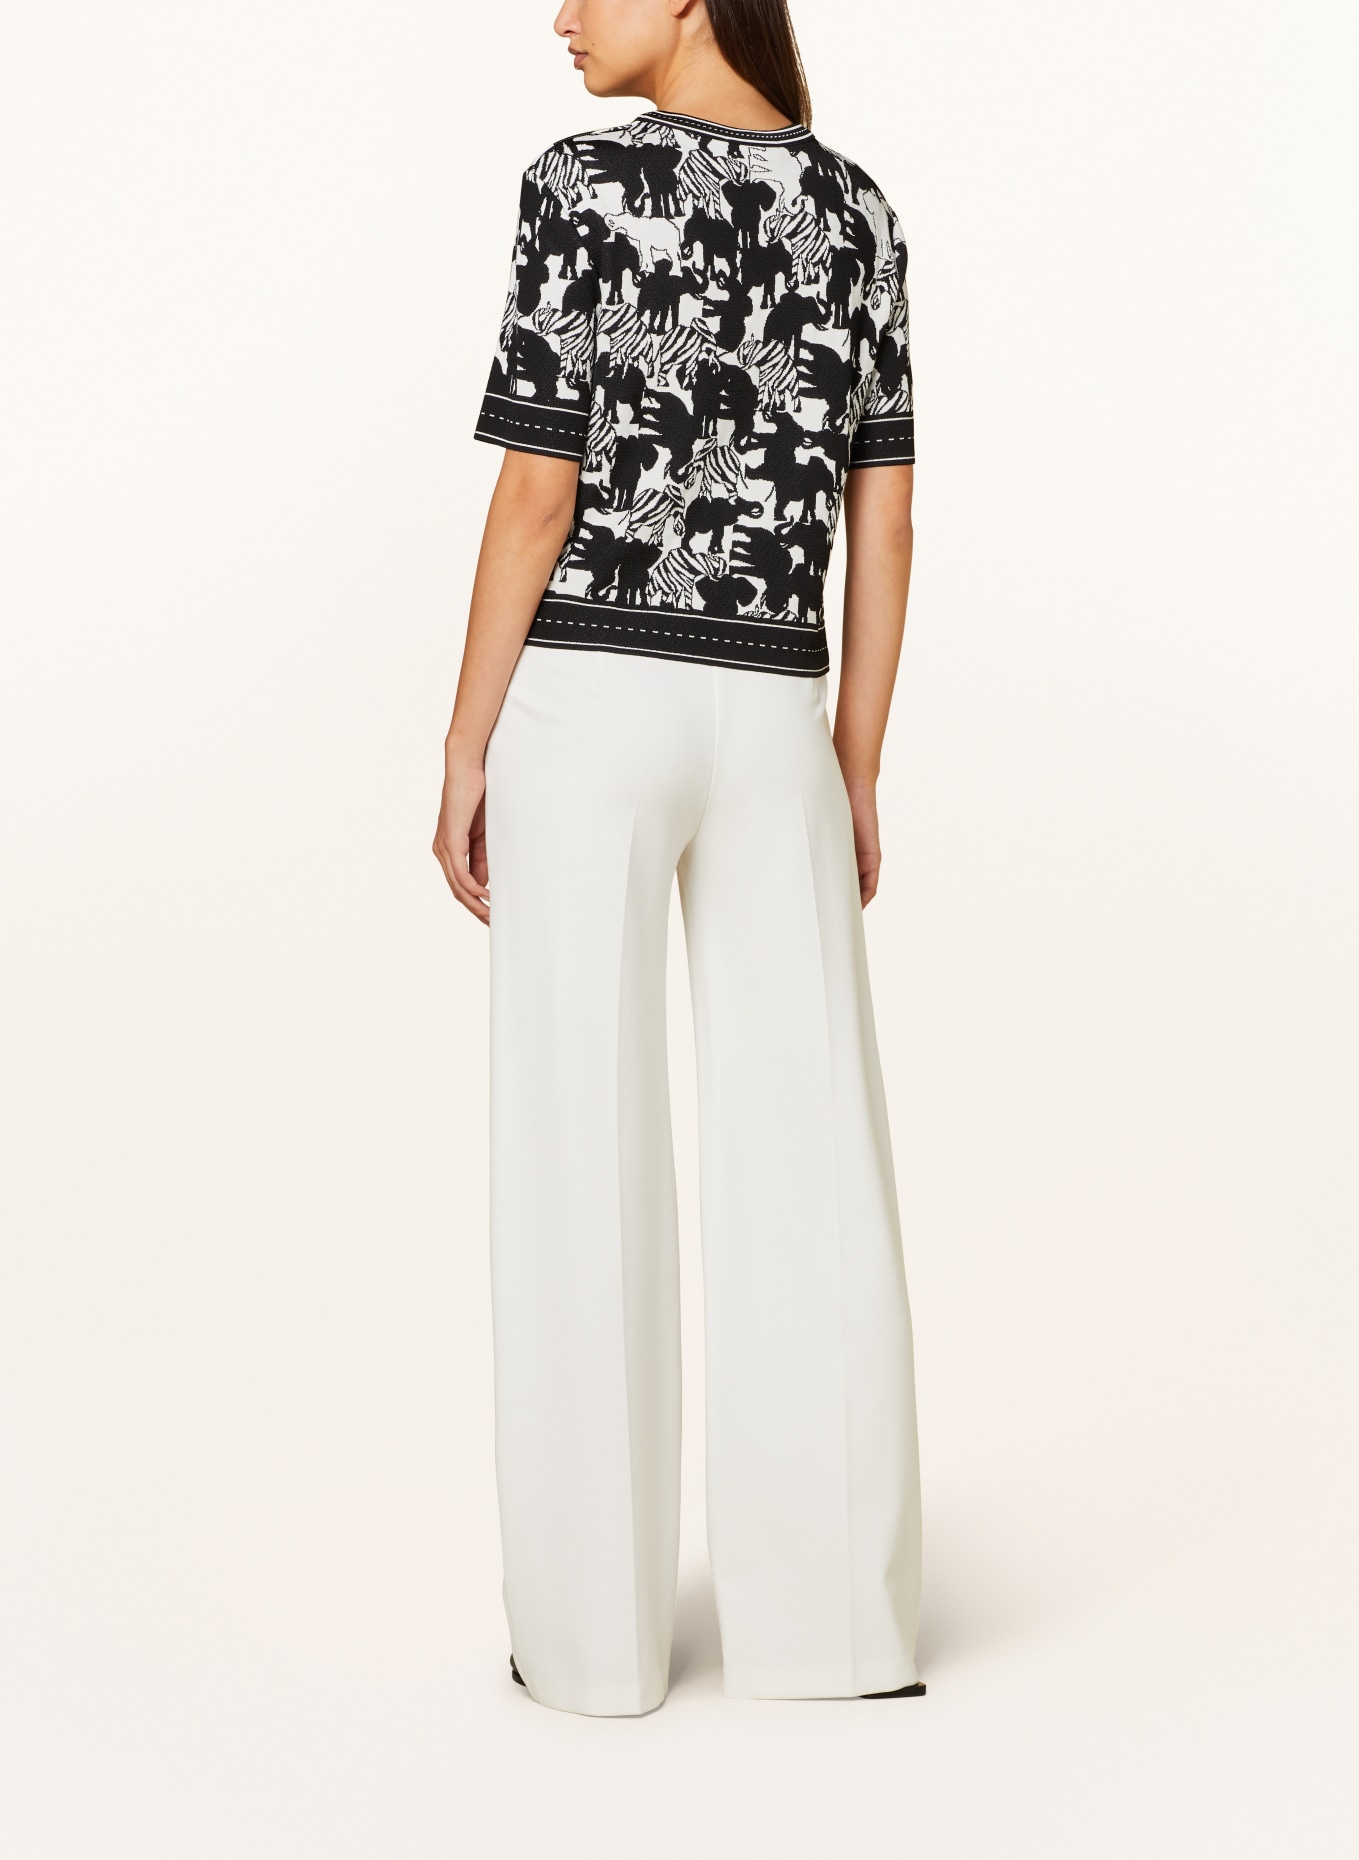 MARC CAIN Knit shirt, Color: 190 white and black (Image 3)